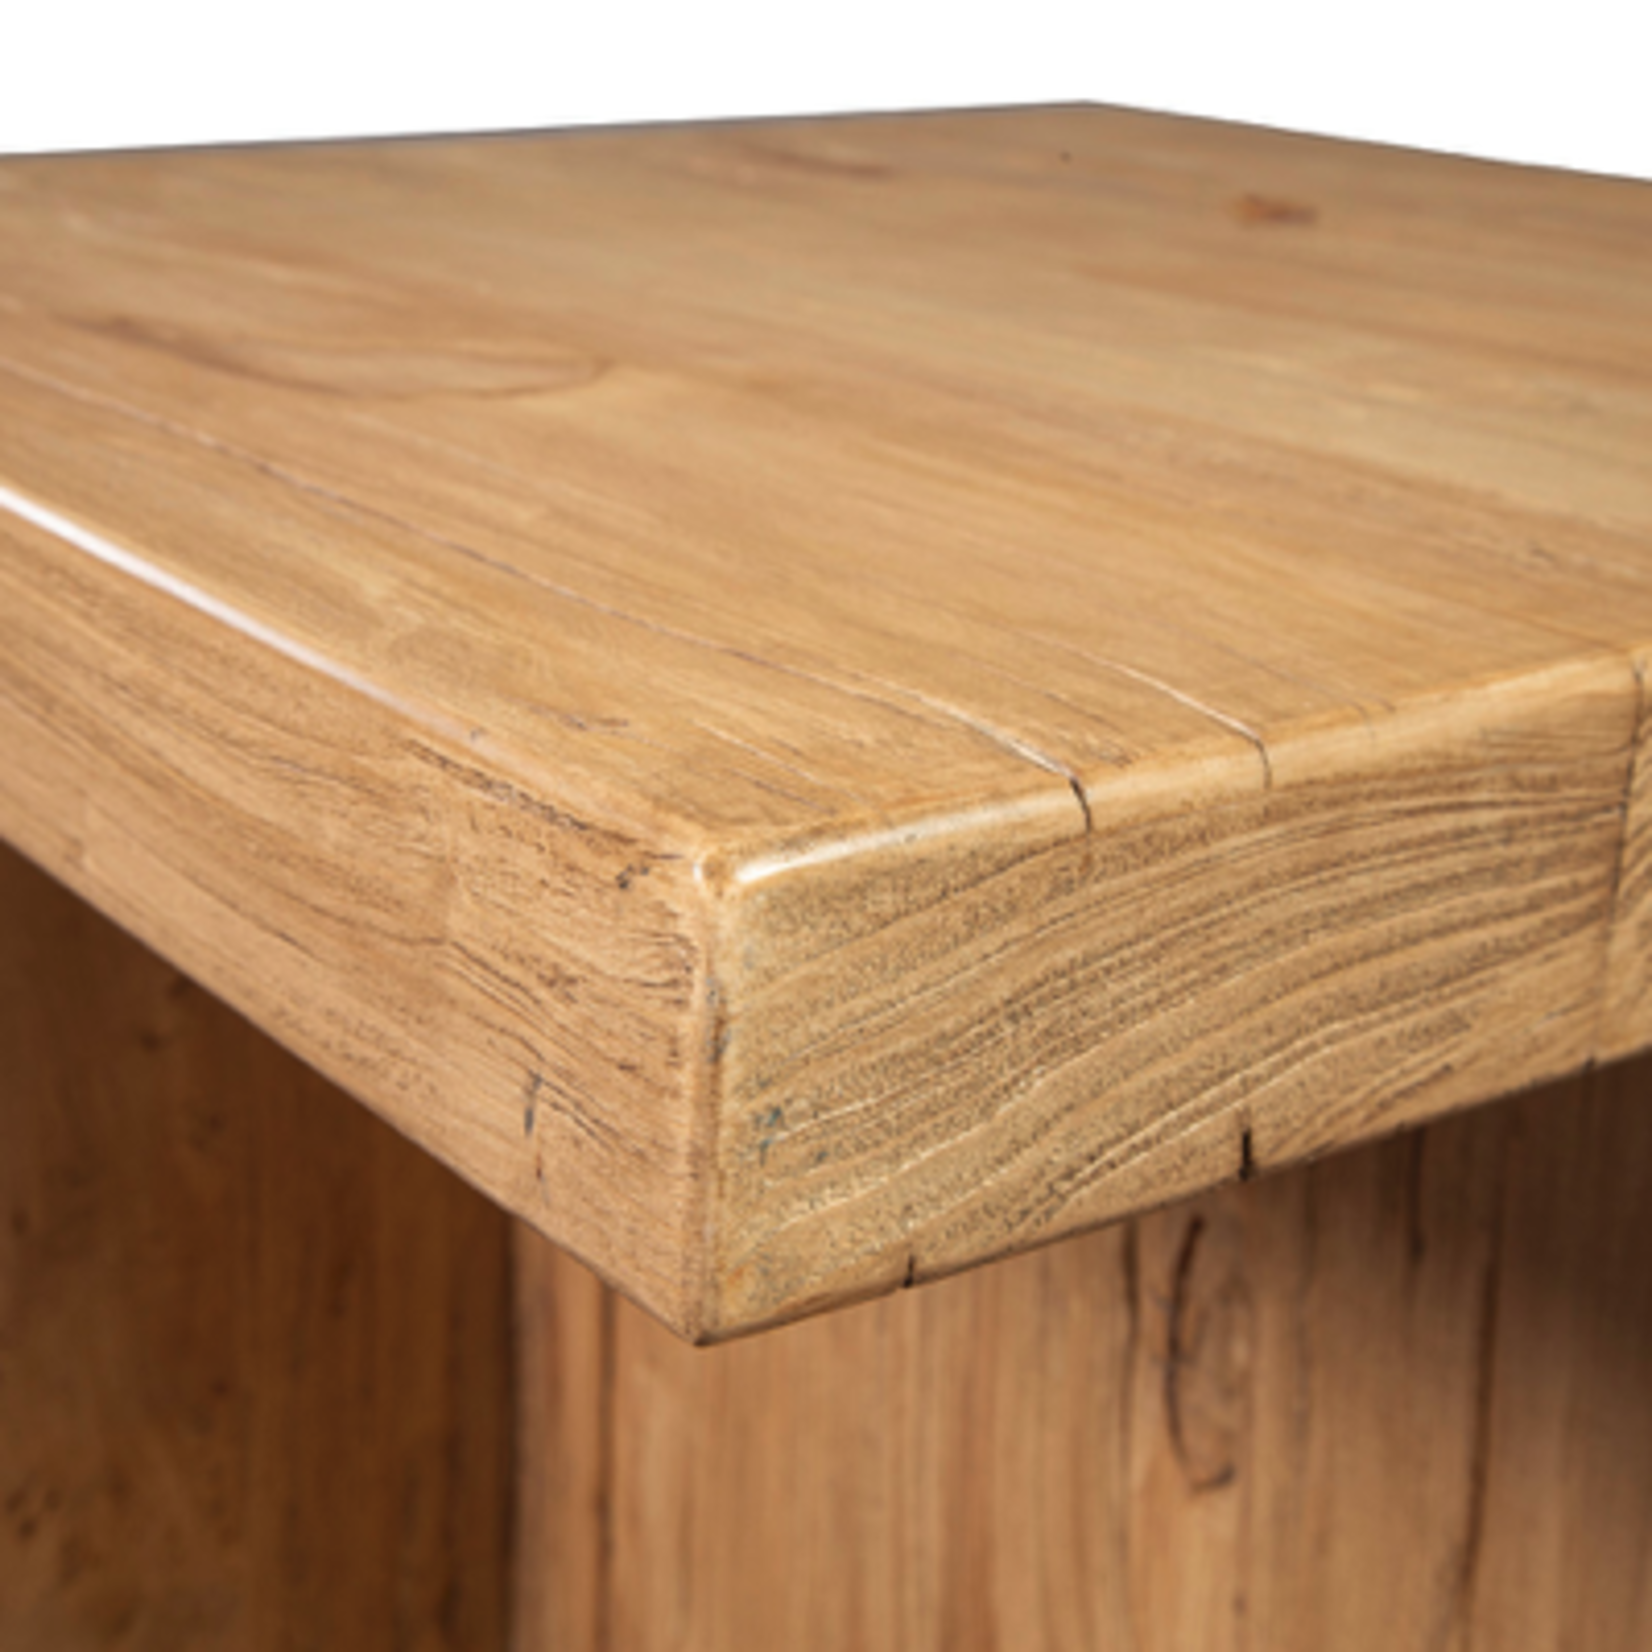 Outside The Box 24x24x24 Bridges Solid Reclaimed Elm Wood End Table